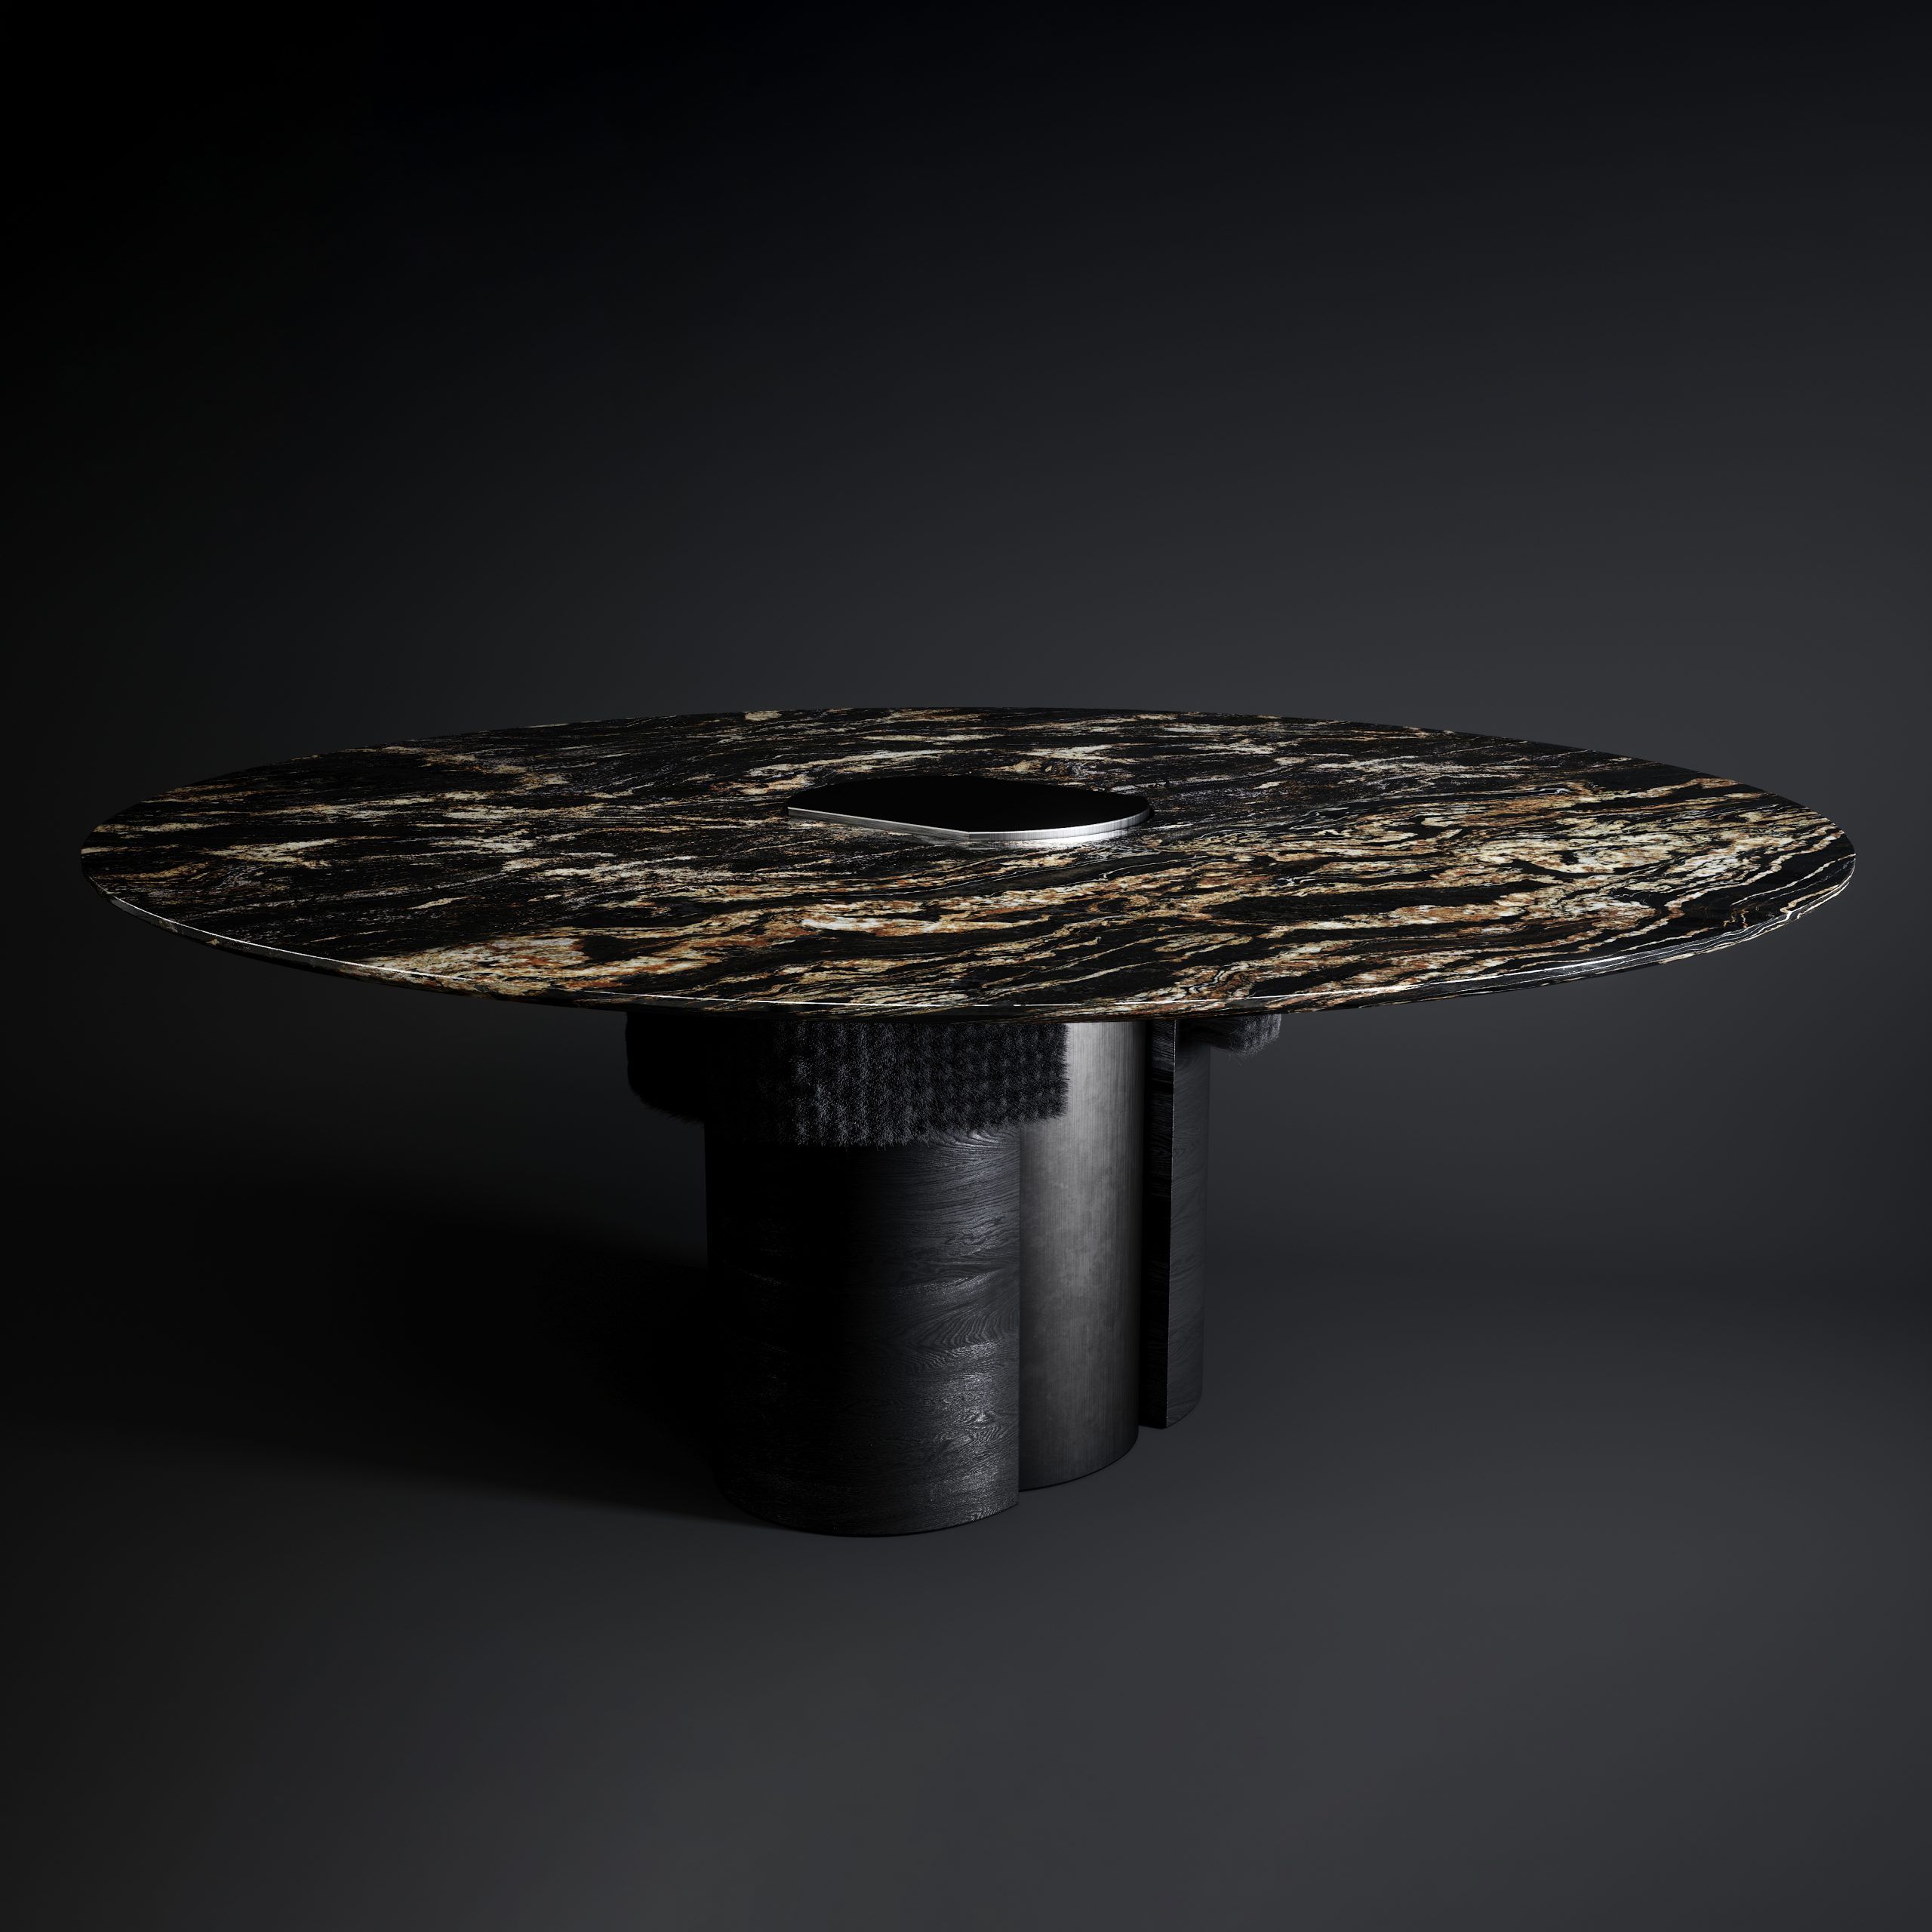 Ad Hoc Roots Table Black courtesy ammann//gallery